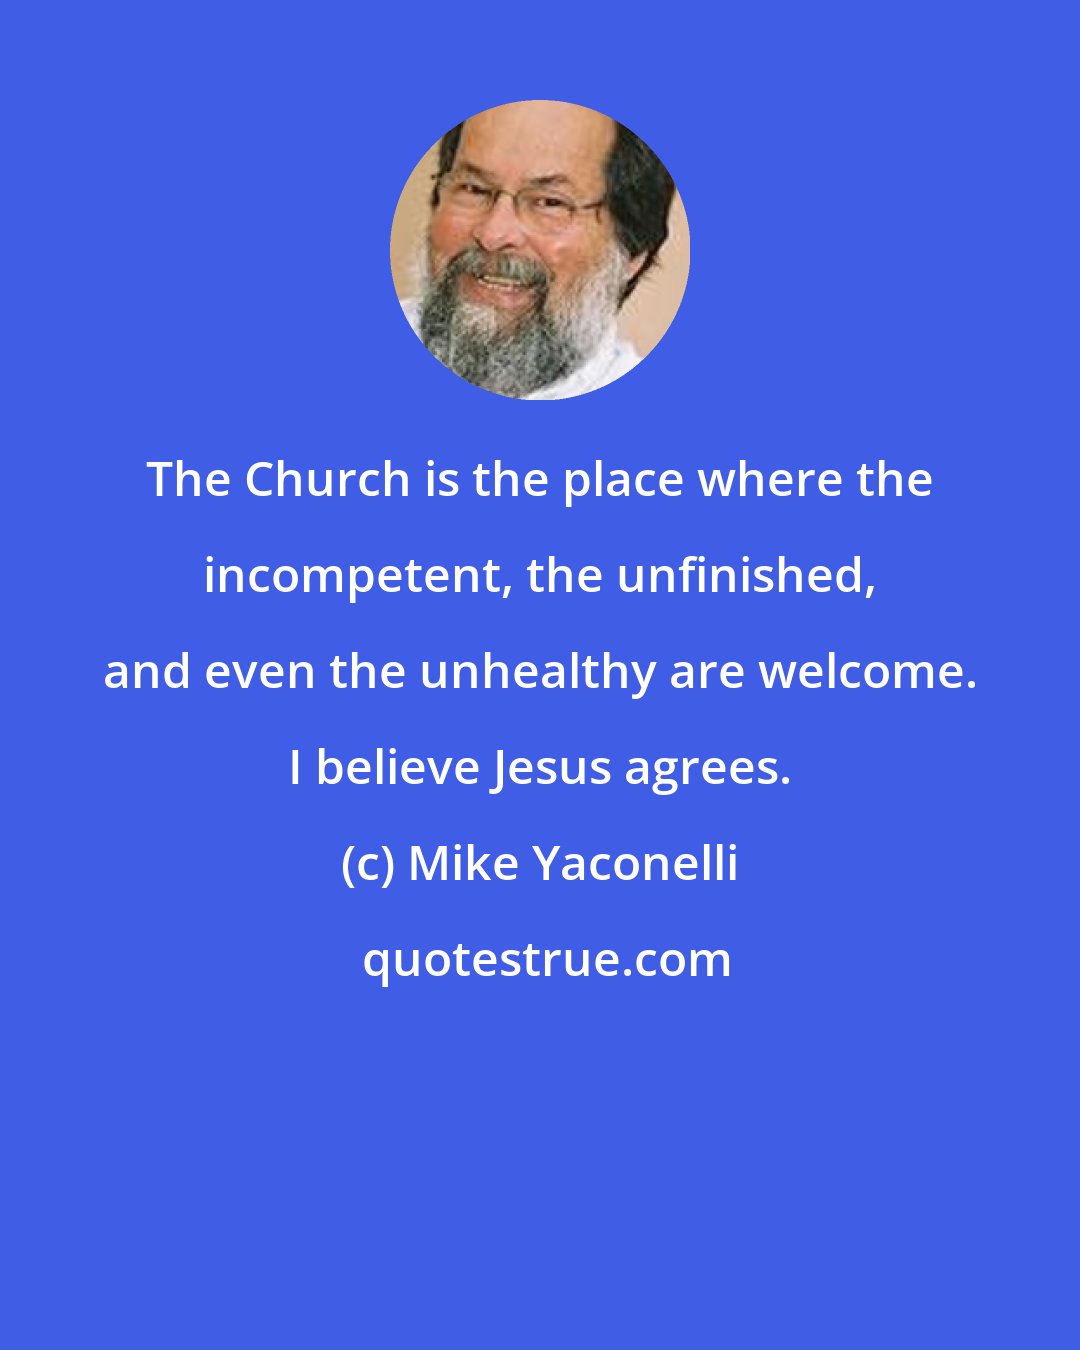 Mike Yaconelli: The Church is the place where the incompetent, the unfinished, and even the unhealthy are welcome. I believe Jesus agrees.